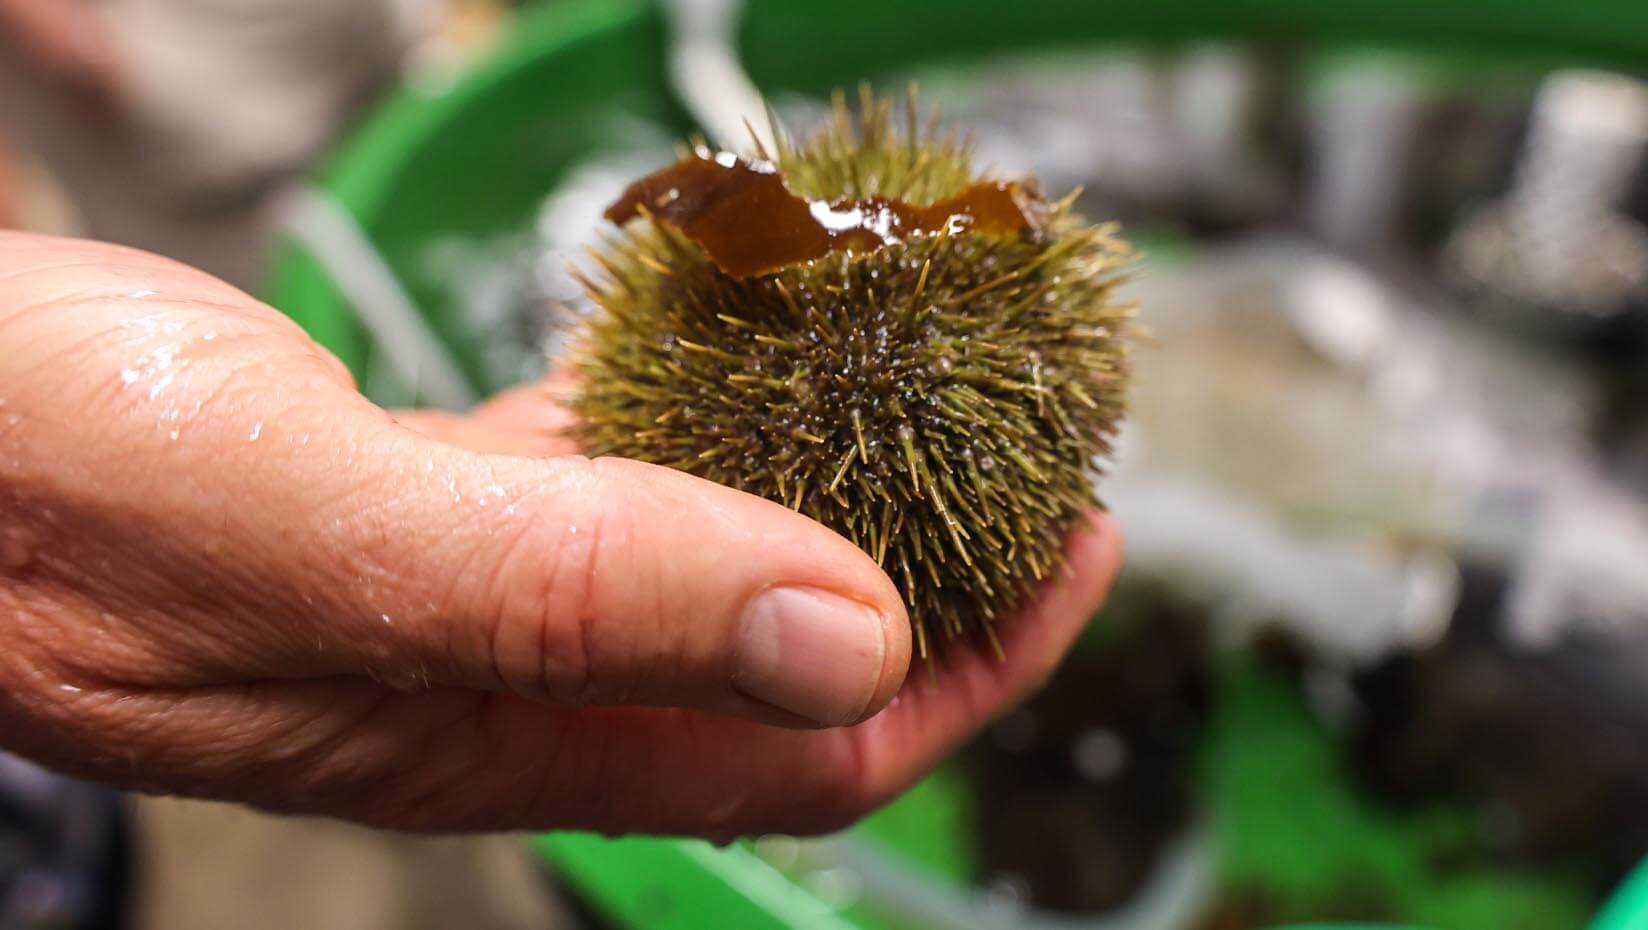 A photo of a hand holding a sea urchin